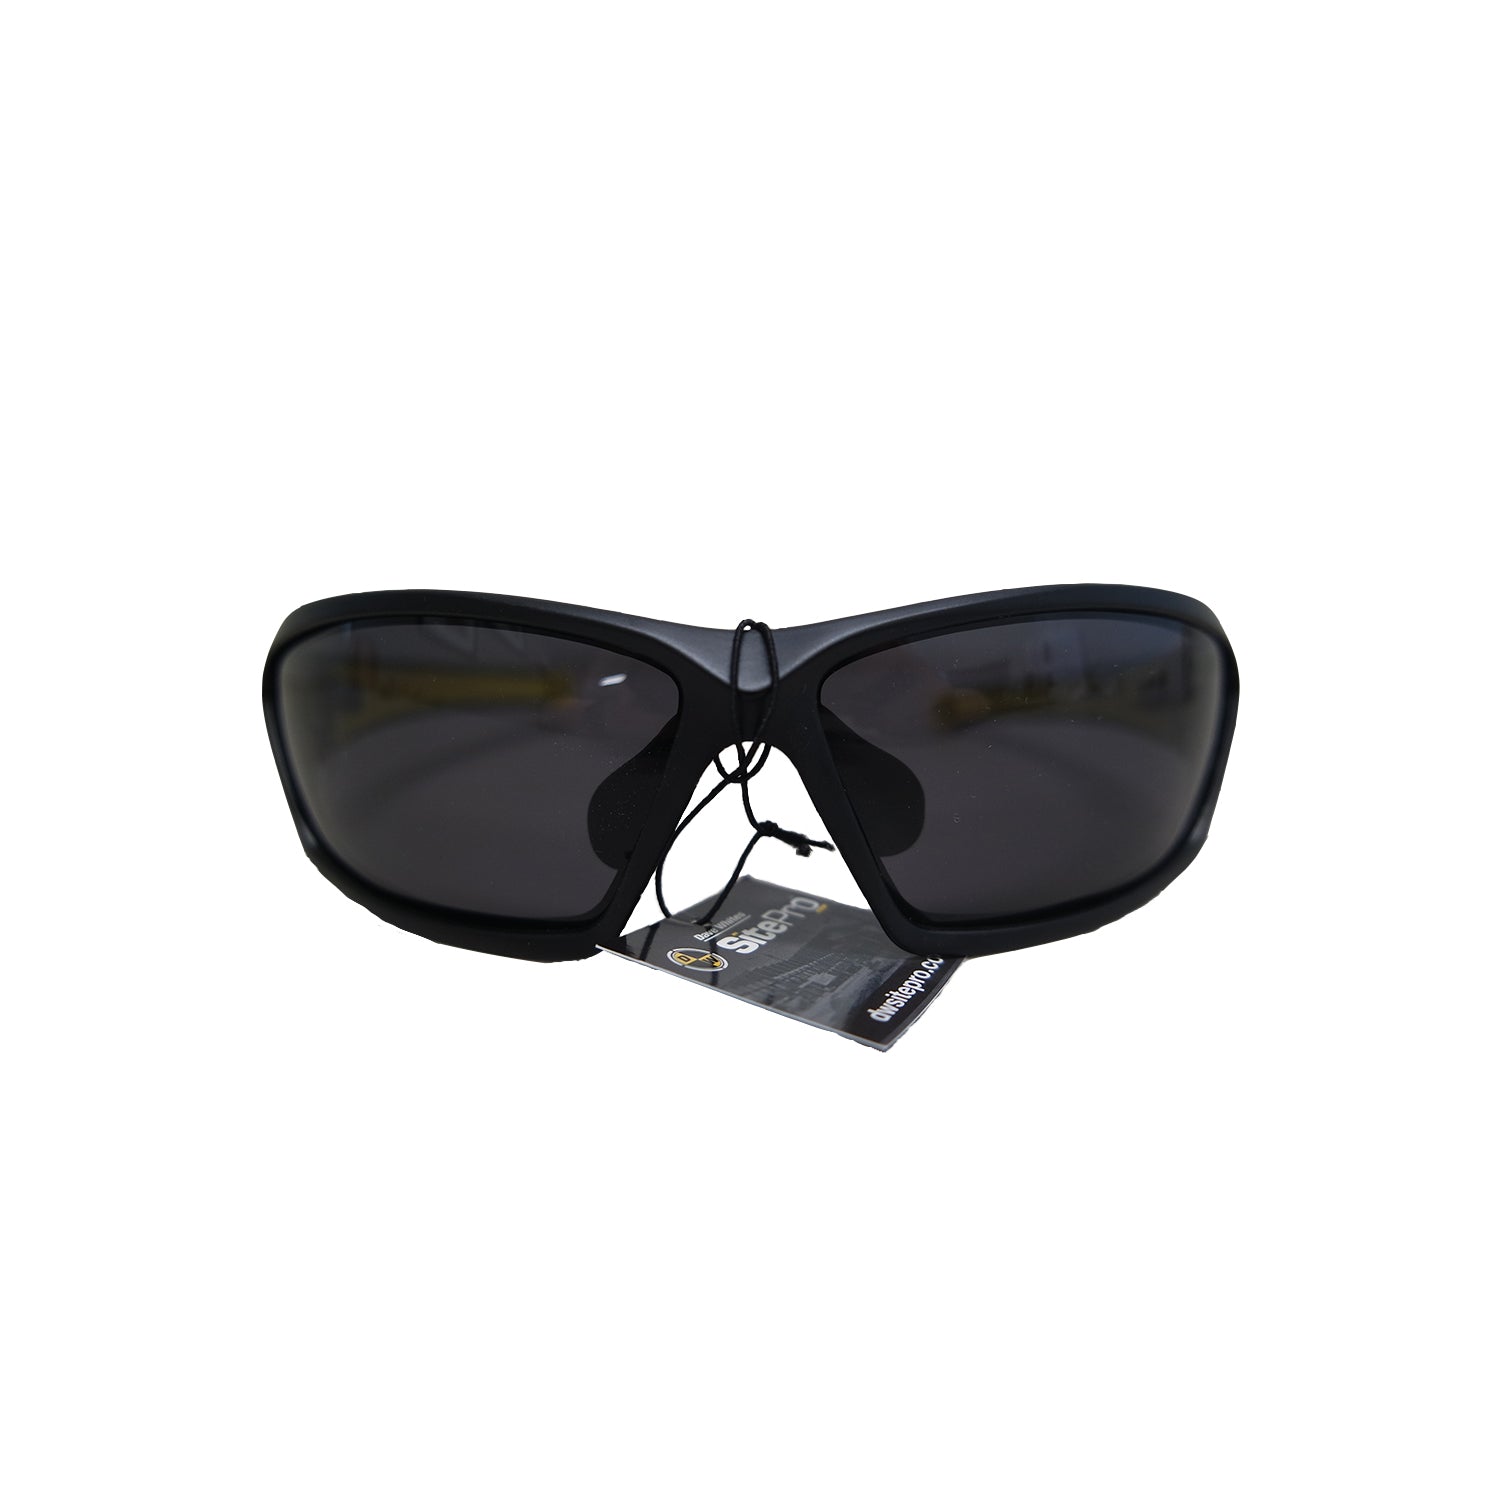 SitePro Safety Glasses, Polarized, Black frame with yellow accents -Safety- eGPS Solutions Inc.